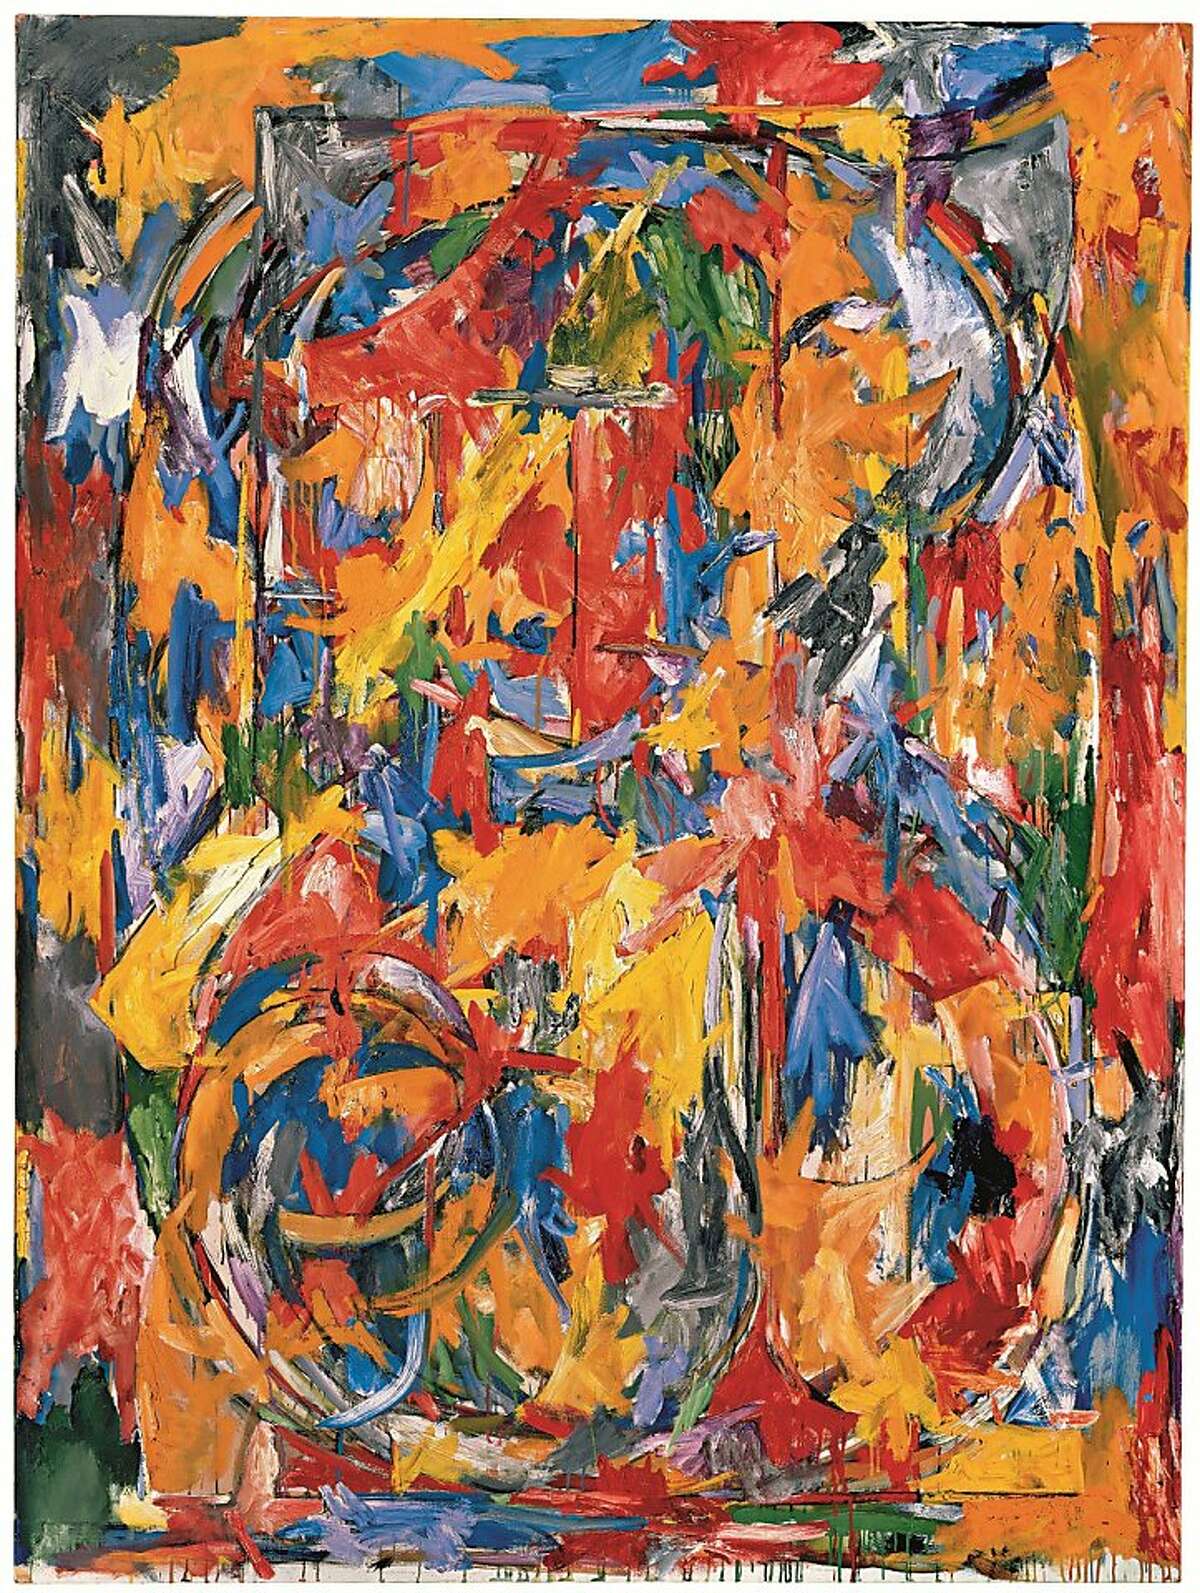 3.Jasper Johns, 0 through 9, 1960; oil on canvas; 72 x 54 in. (182.8 x 137.1 cm); Collection of Helen and Charles Schwab, fractional gift to the San Francisco Museum of Modern Art; © Jasper Johns / Licensed by VAGA, New York, NYensed by VAGA, New York, NY 011.tif 2